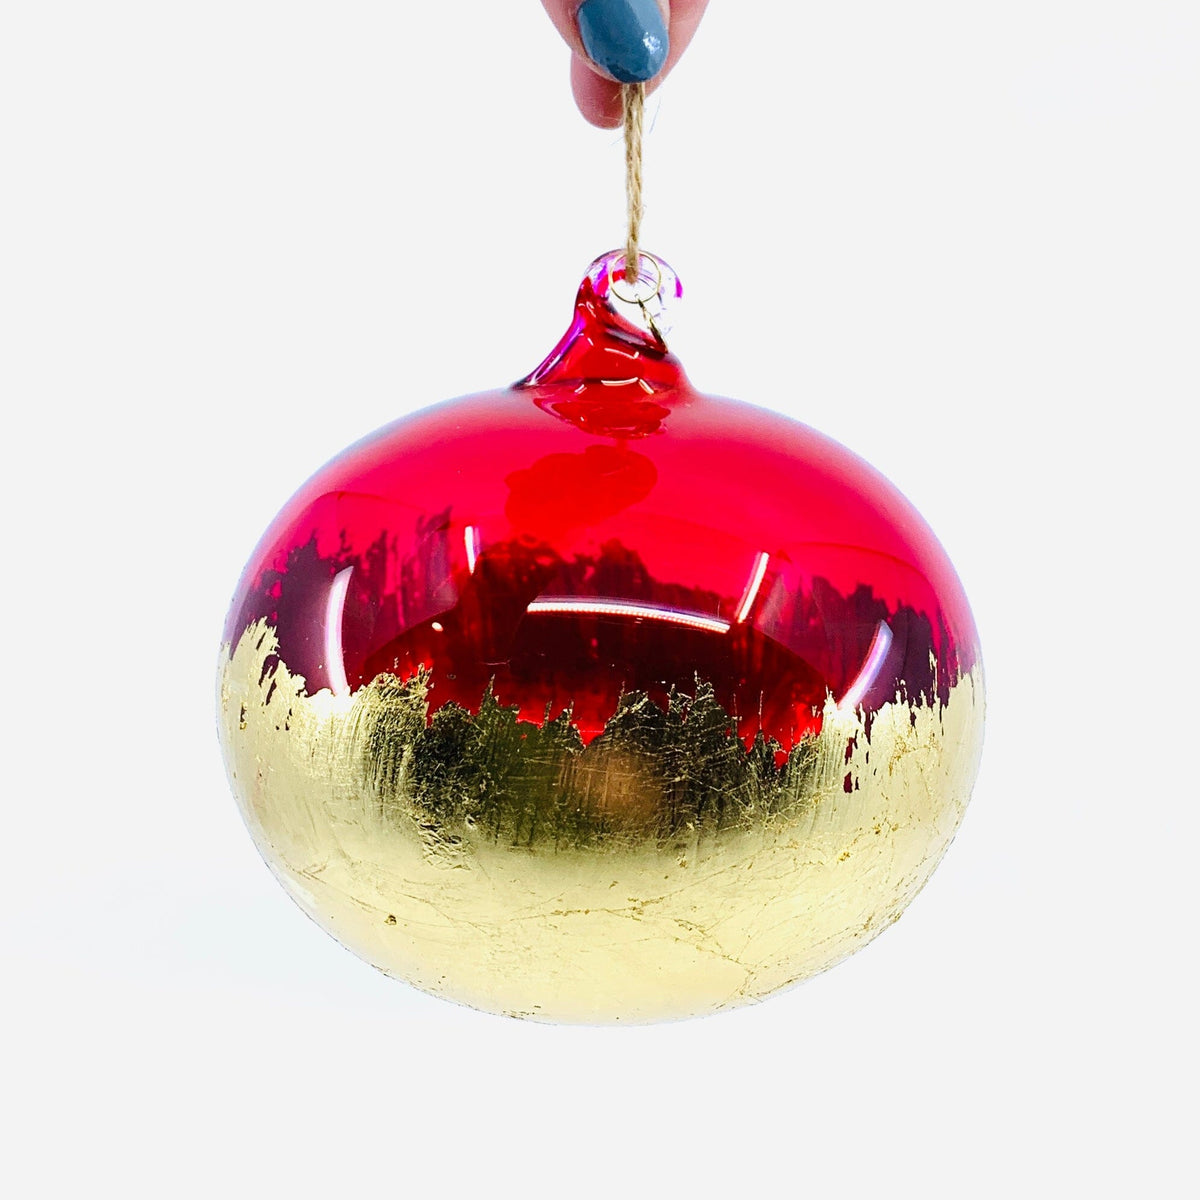 Rainbow Gold Dipped Orb Ornament One Hundred 80 Degrees H 